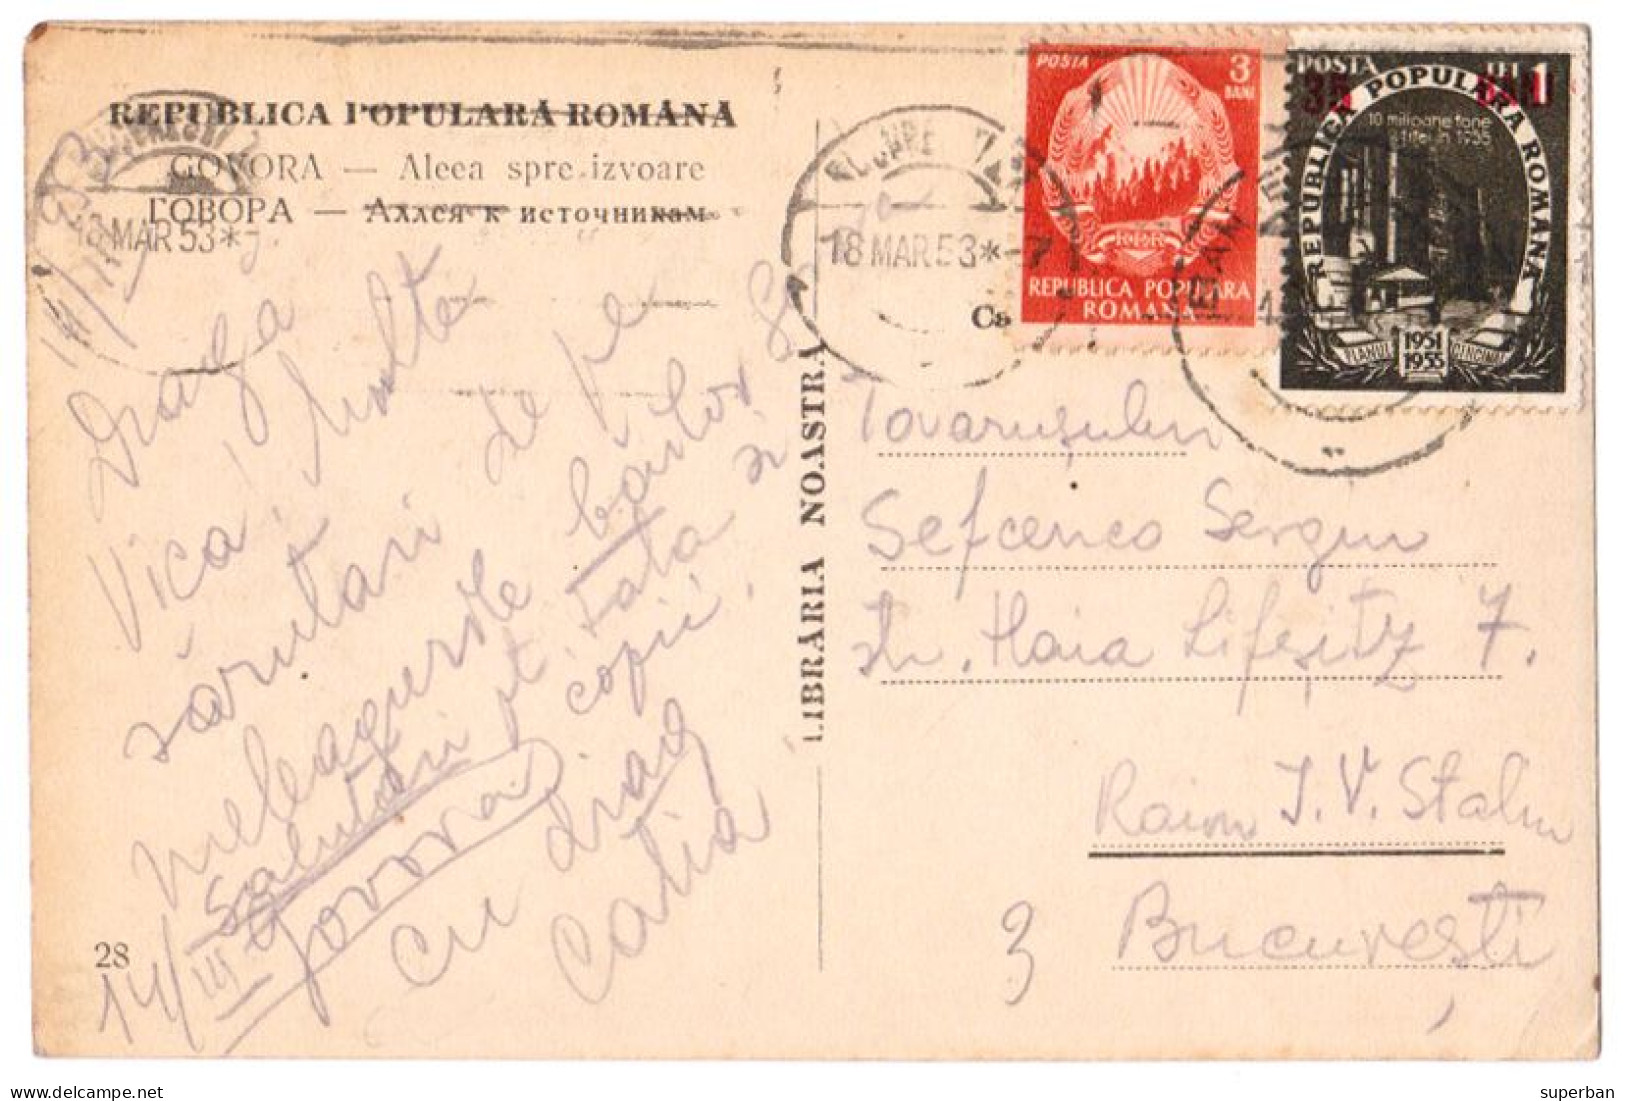 ROMANIA : 1952 - STABILIZAREA MONETARA / MONETARY STABILIZATION - POSTCARD MAILED With OVERPRINTED STAMPS - RRR (am158) - Covers & Documents